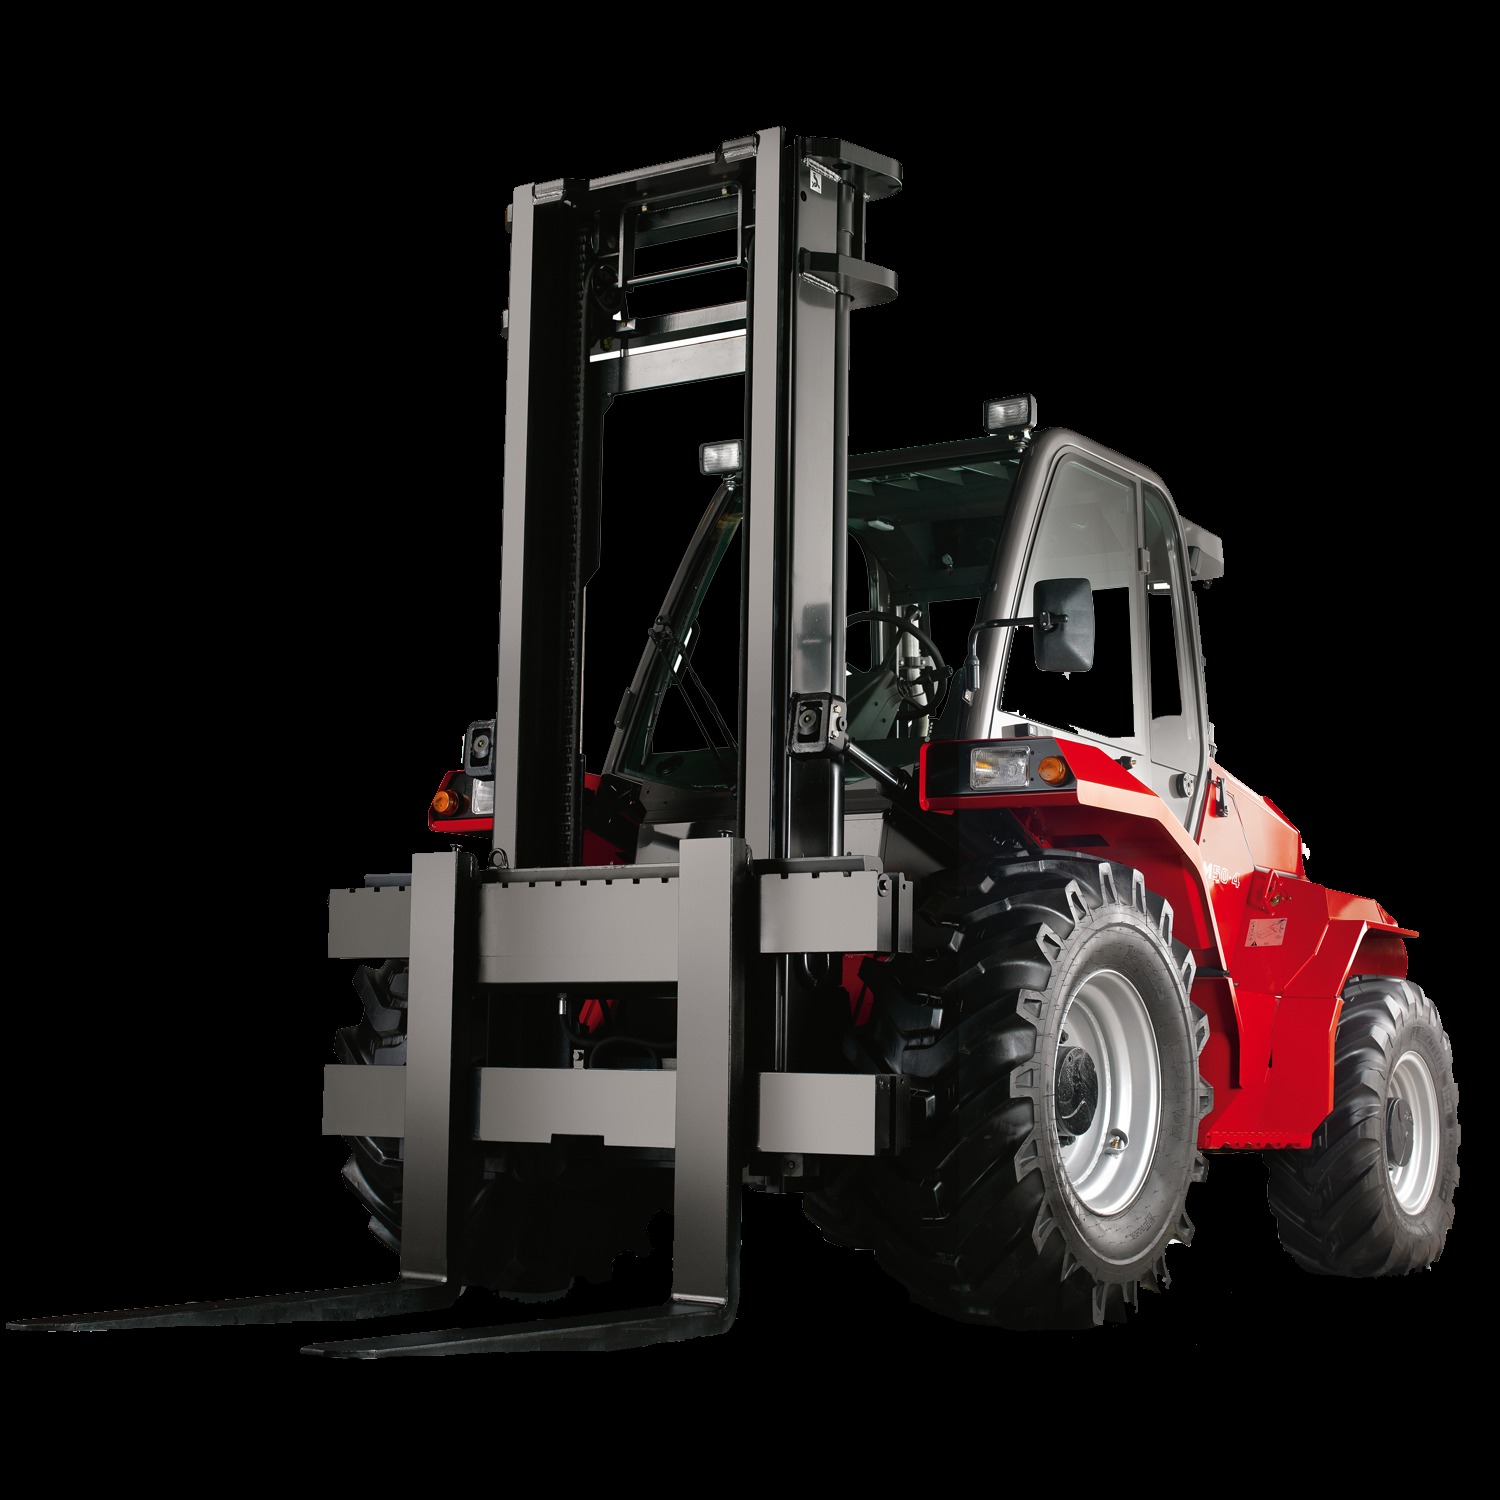 Used 2018 MANITOU M50.4 Rough Terrain Forklift for sale in Red Deer Alberta